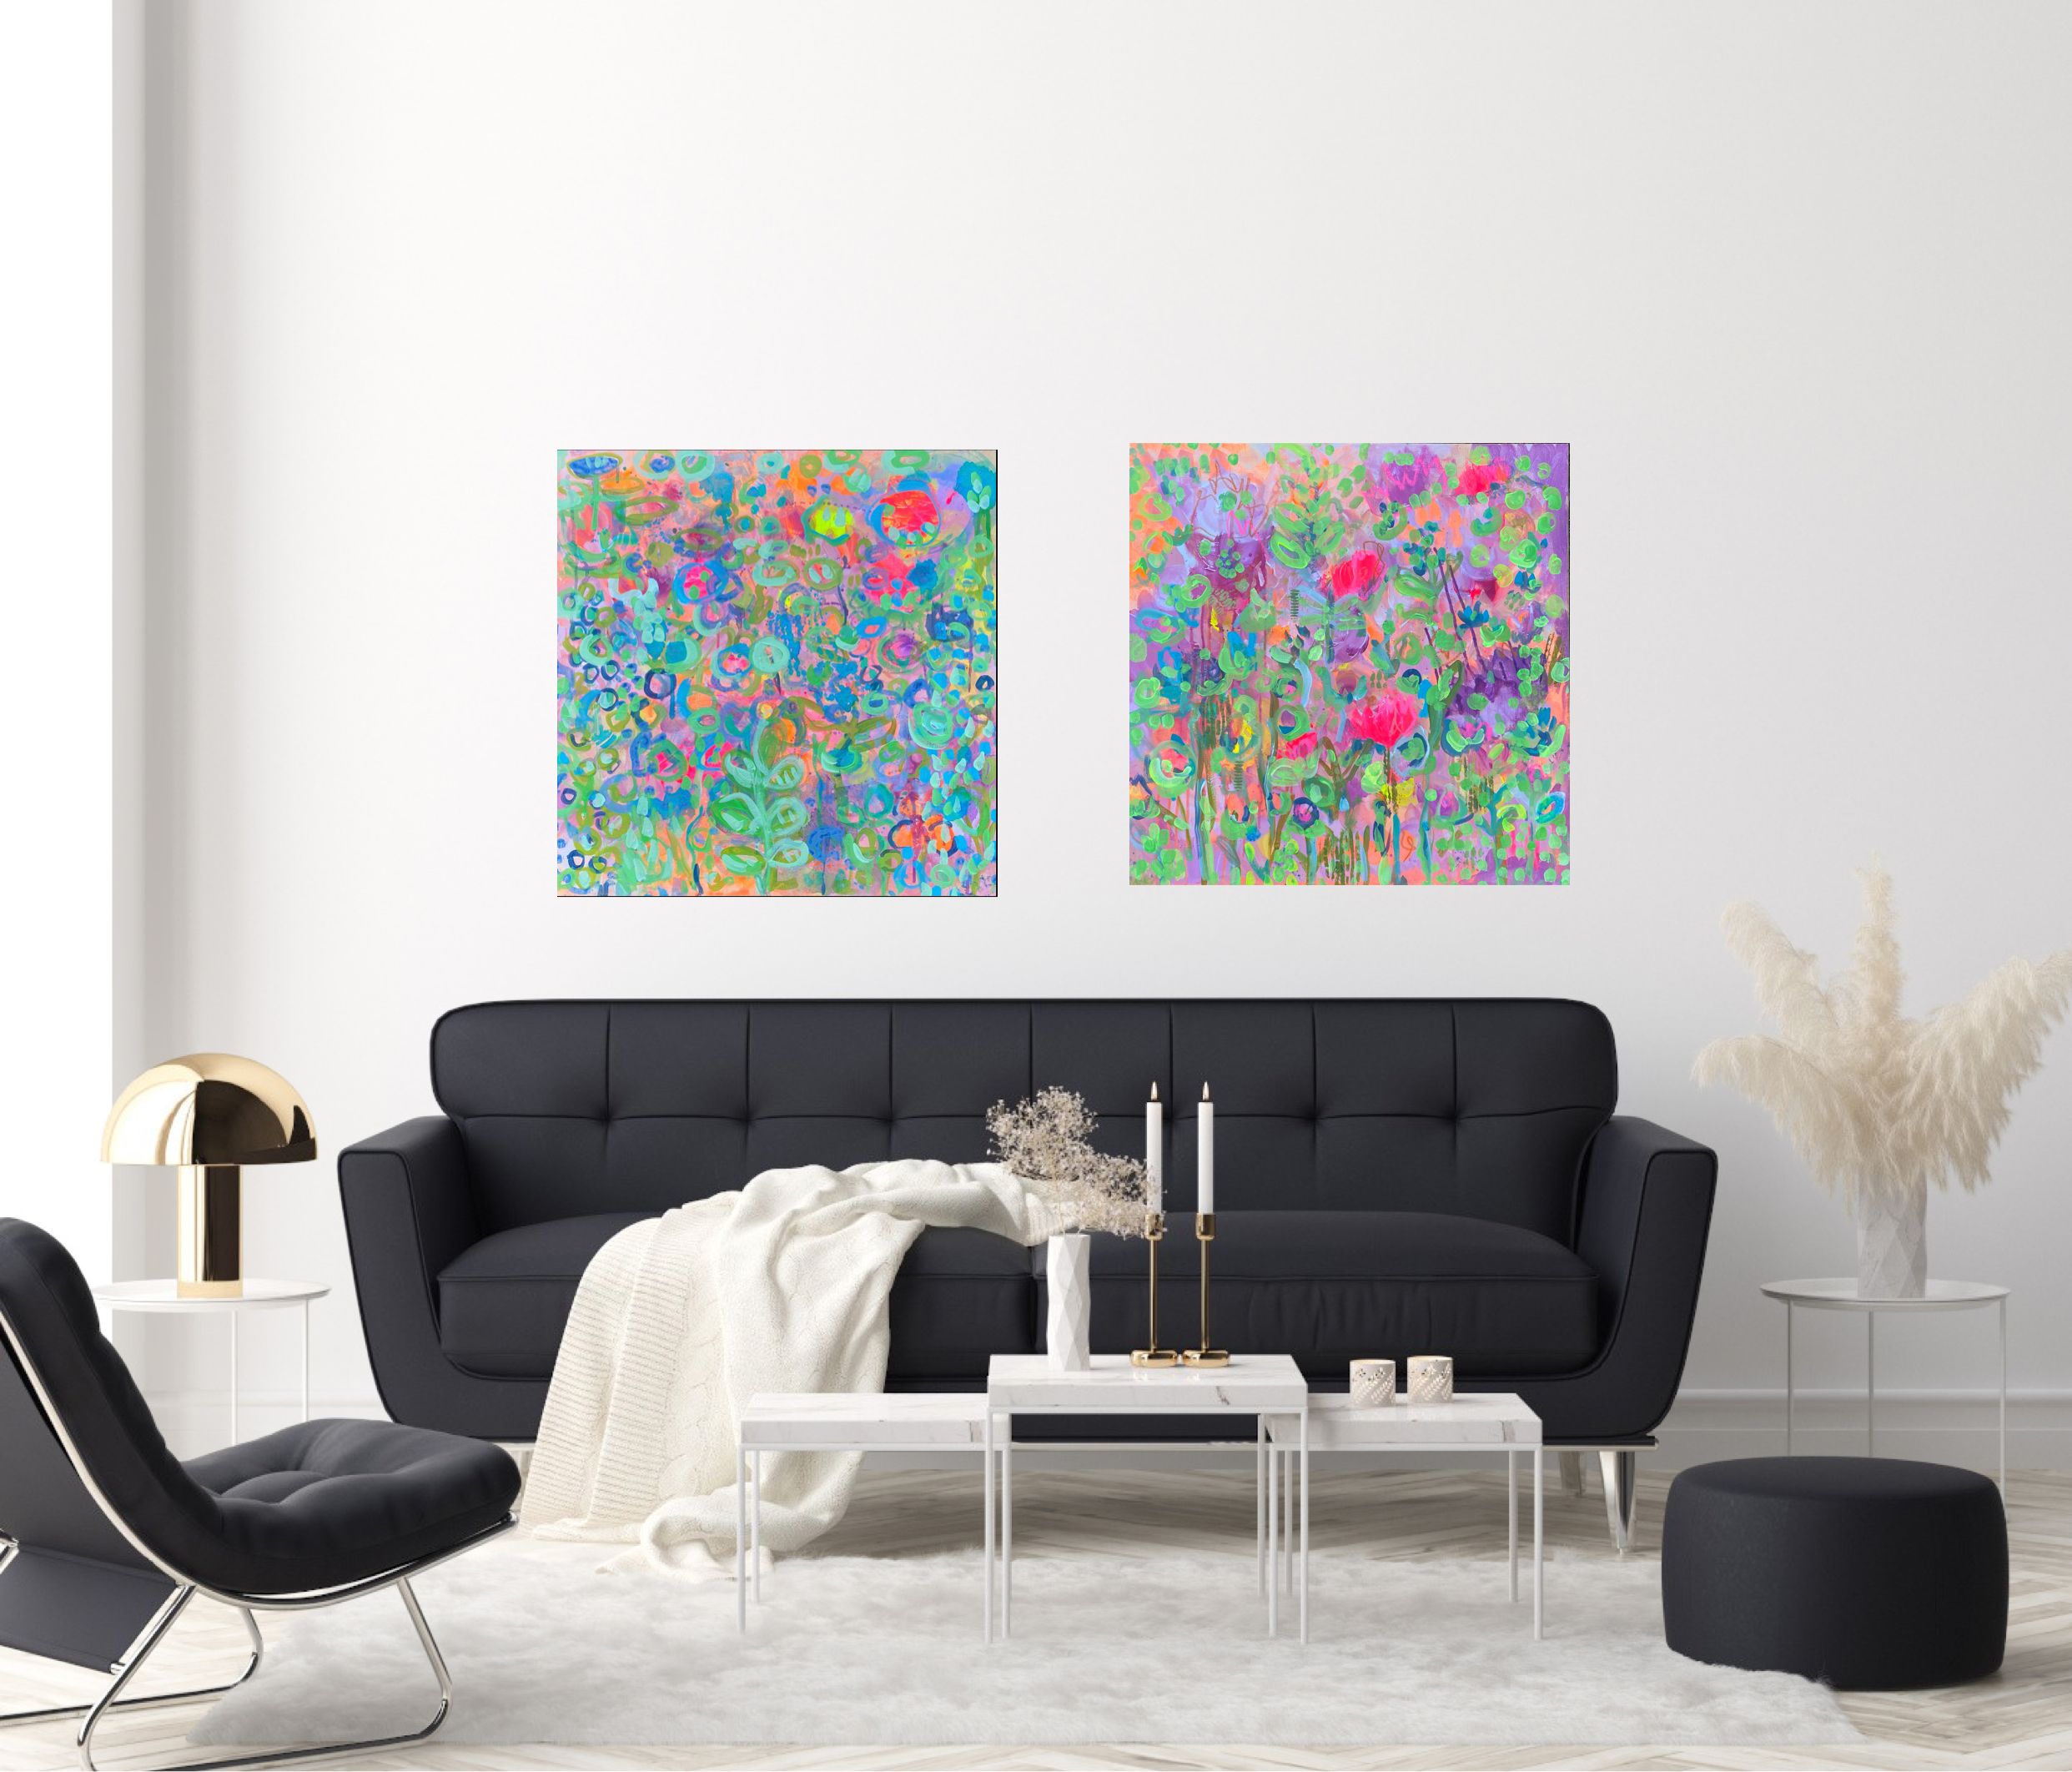 bright vibrant happy abstract floral painting by artist kate shepherd host of the creative genius podcast in front of a clack couch on a white wall